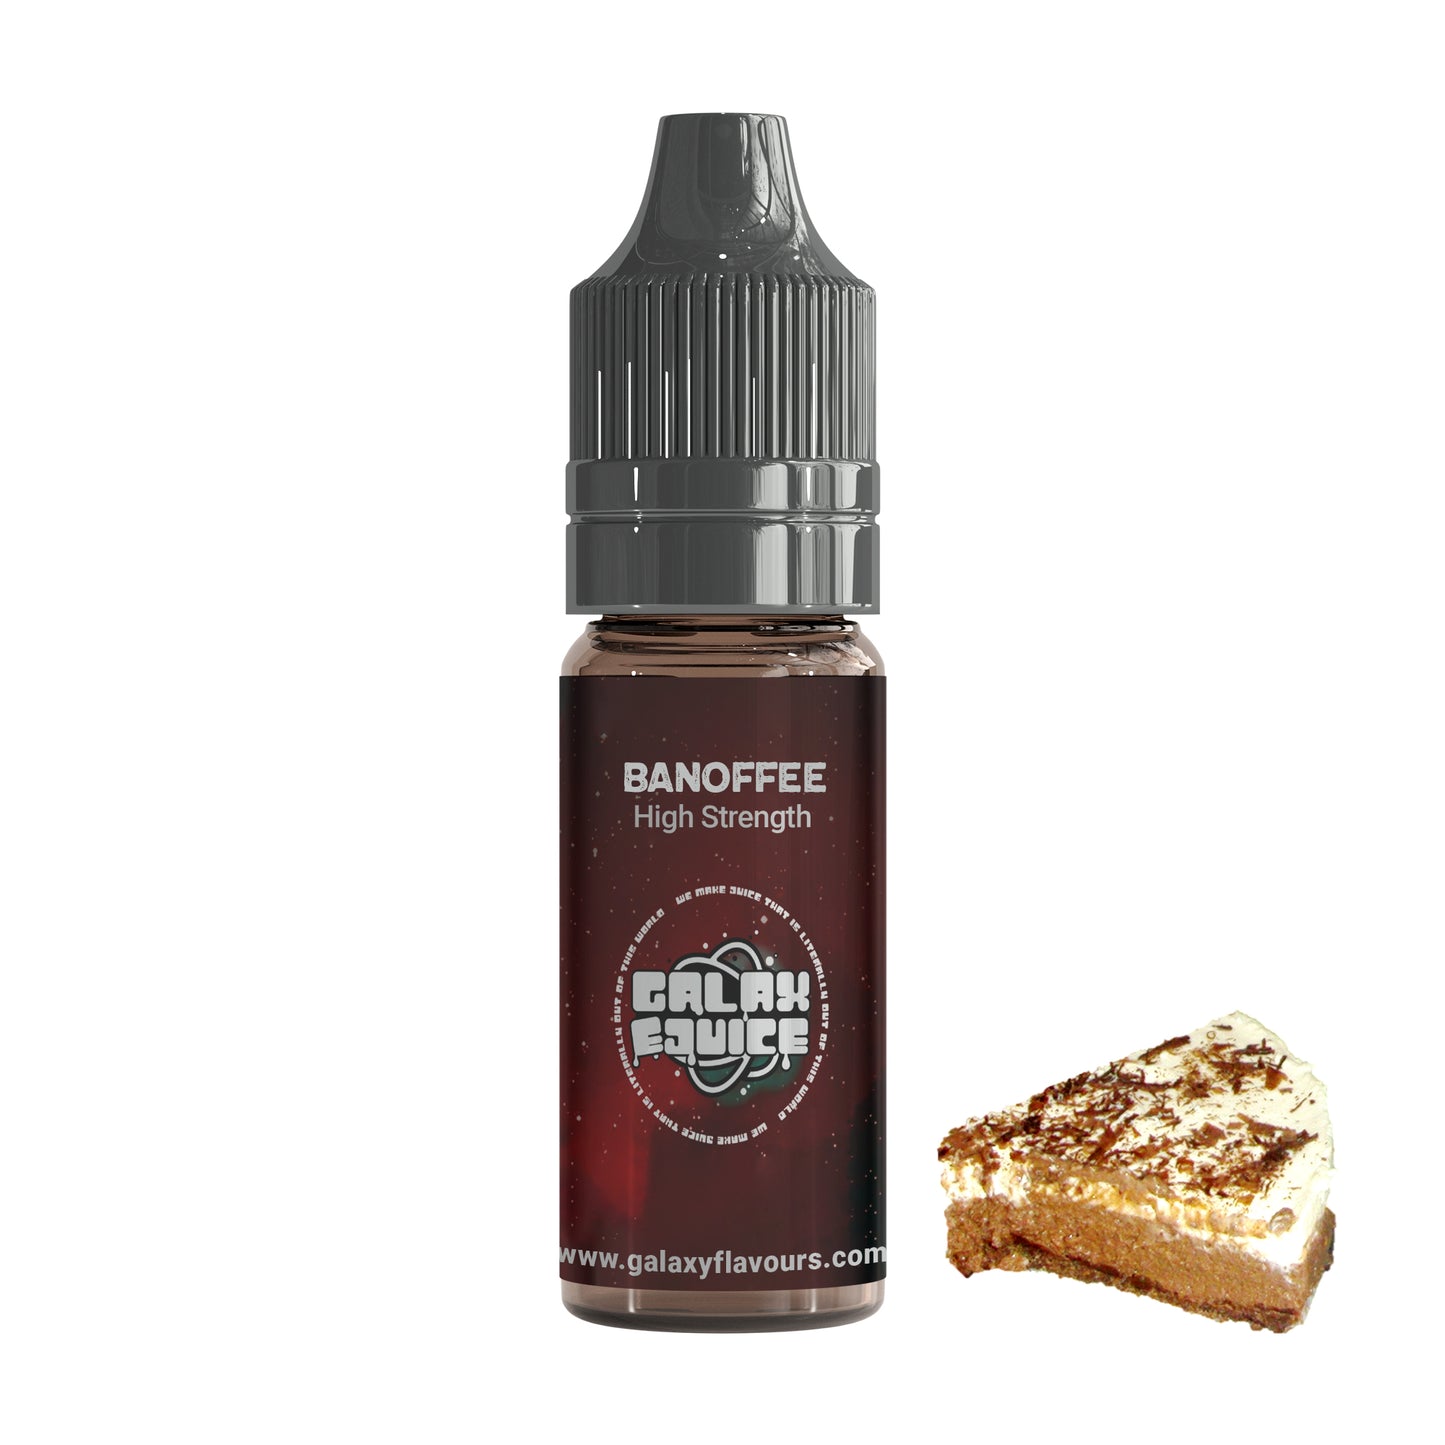 Banoffee High Strength Professional Flavouring.